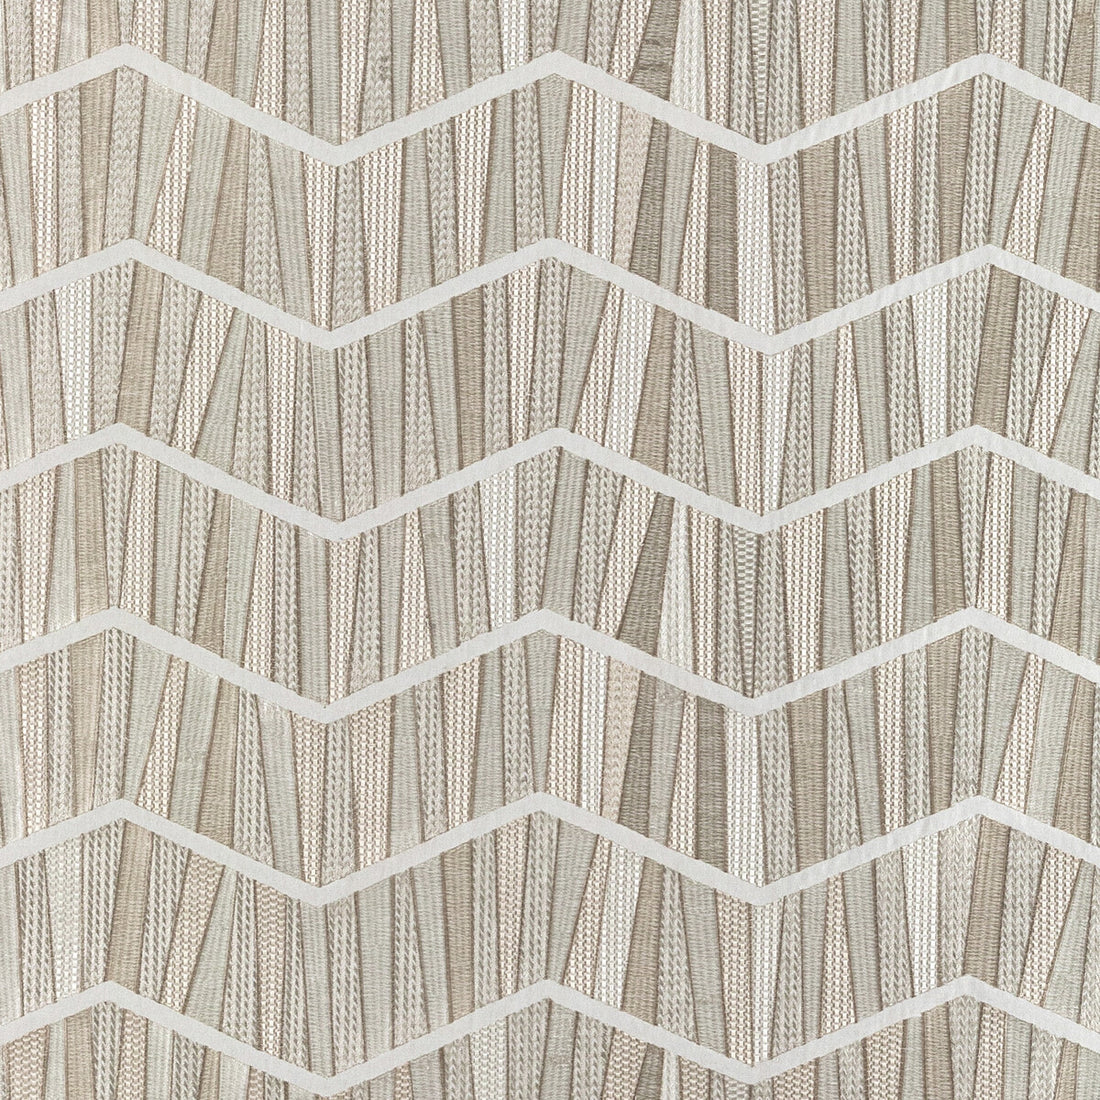 Right Angles fabric in ivory color - pattern 36352.116.0 - by Kravet Couture in the Modern Luxe III collection